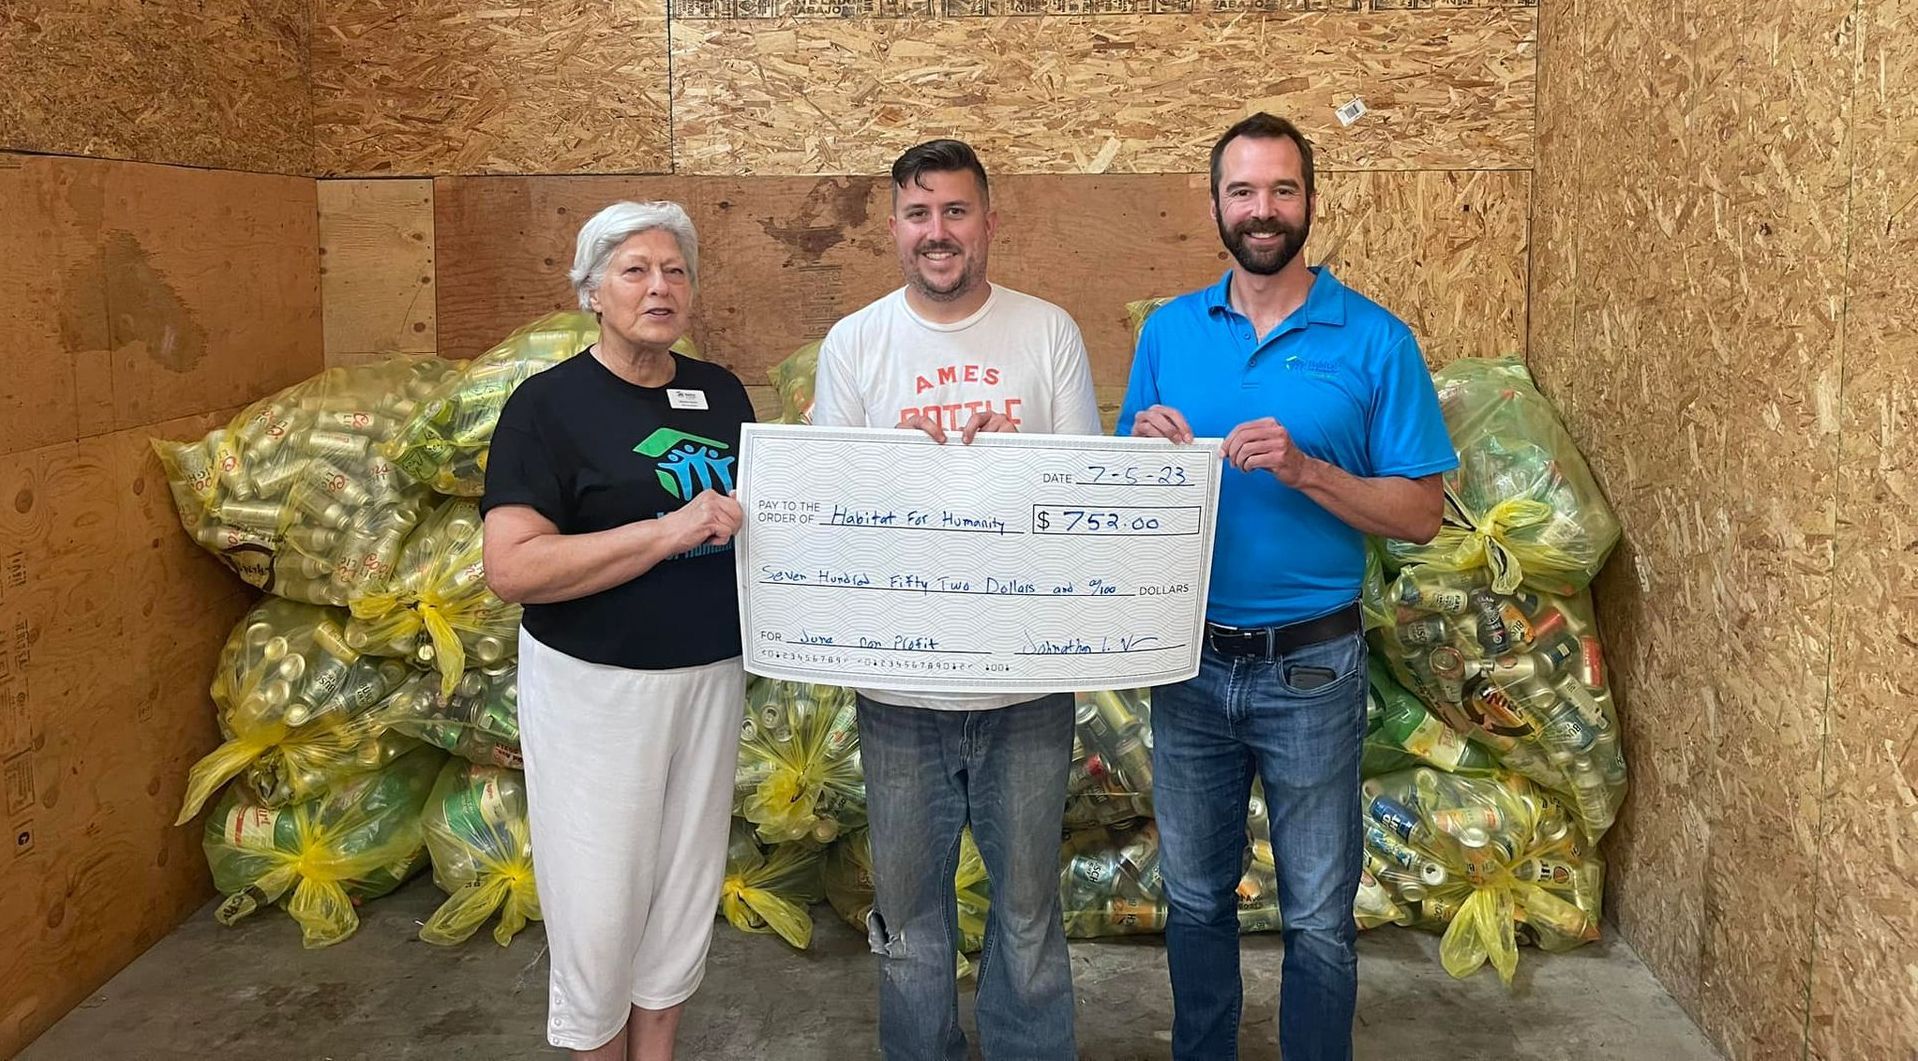 Ames Bottle and Can Check Presentation to Habitat for Humanity